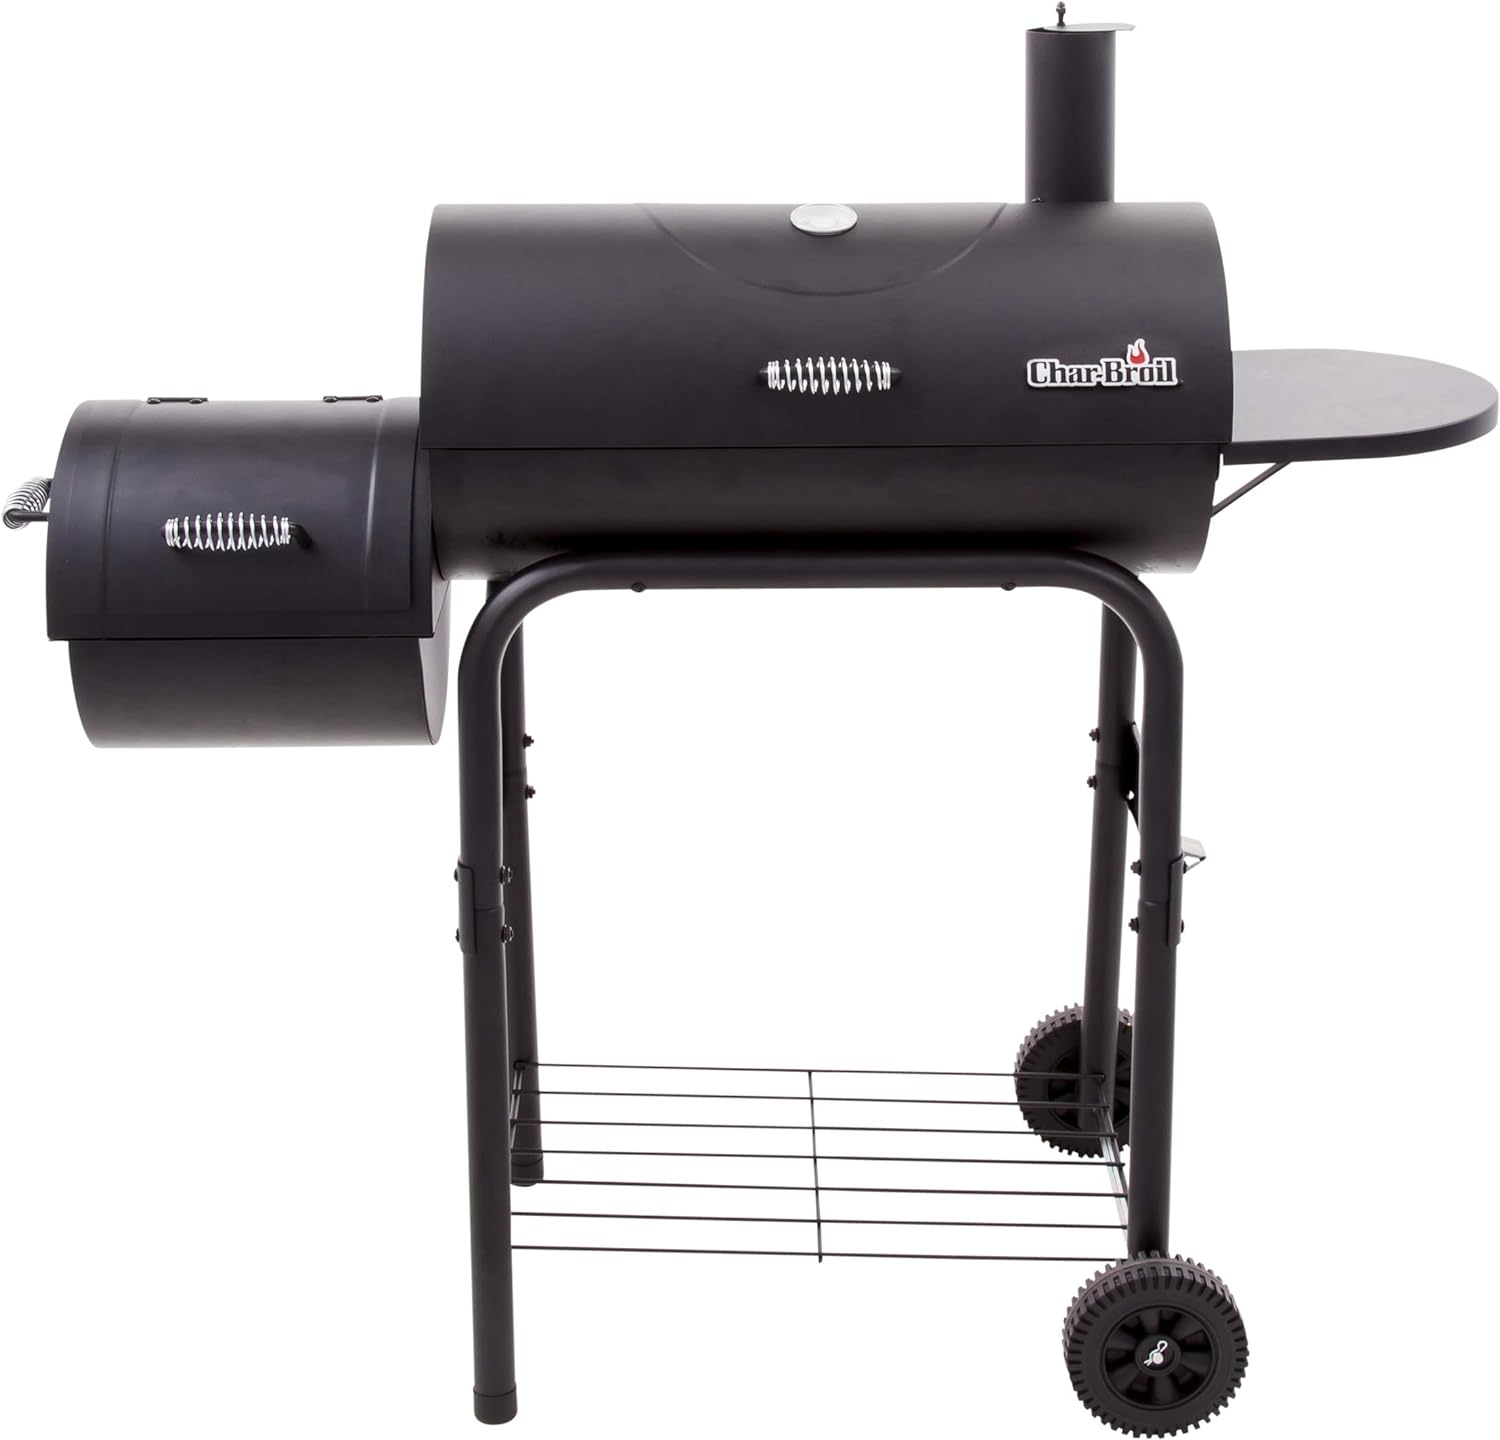 Char-Broil Offset Smoker Review